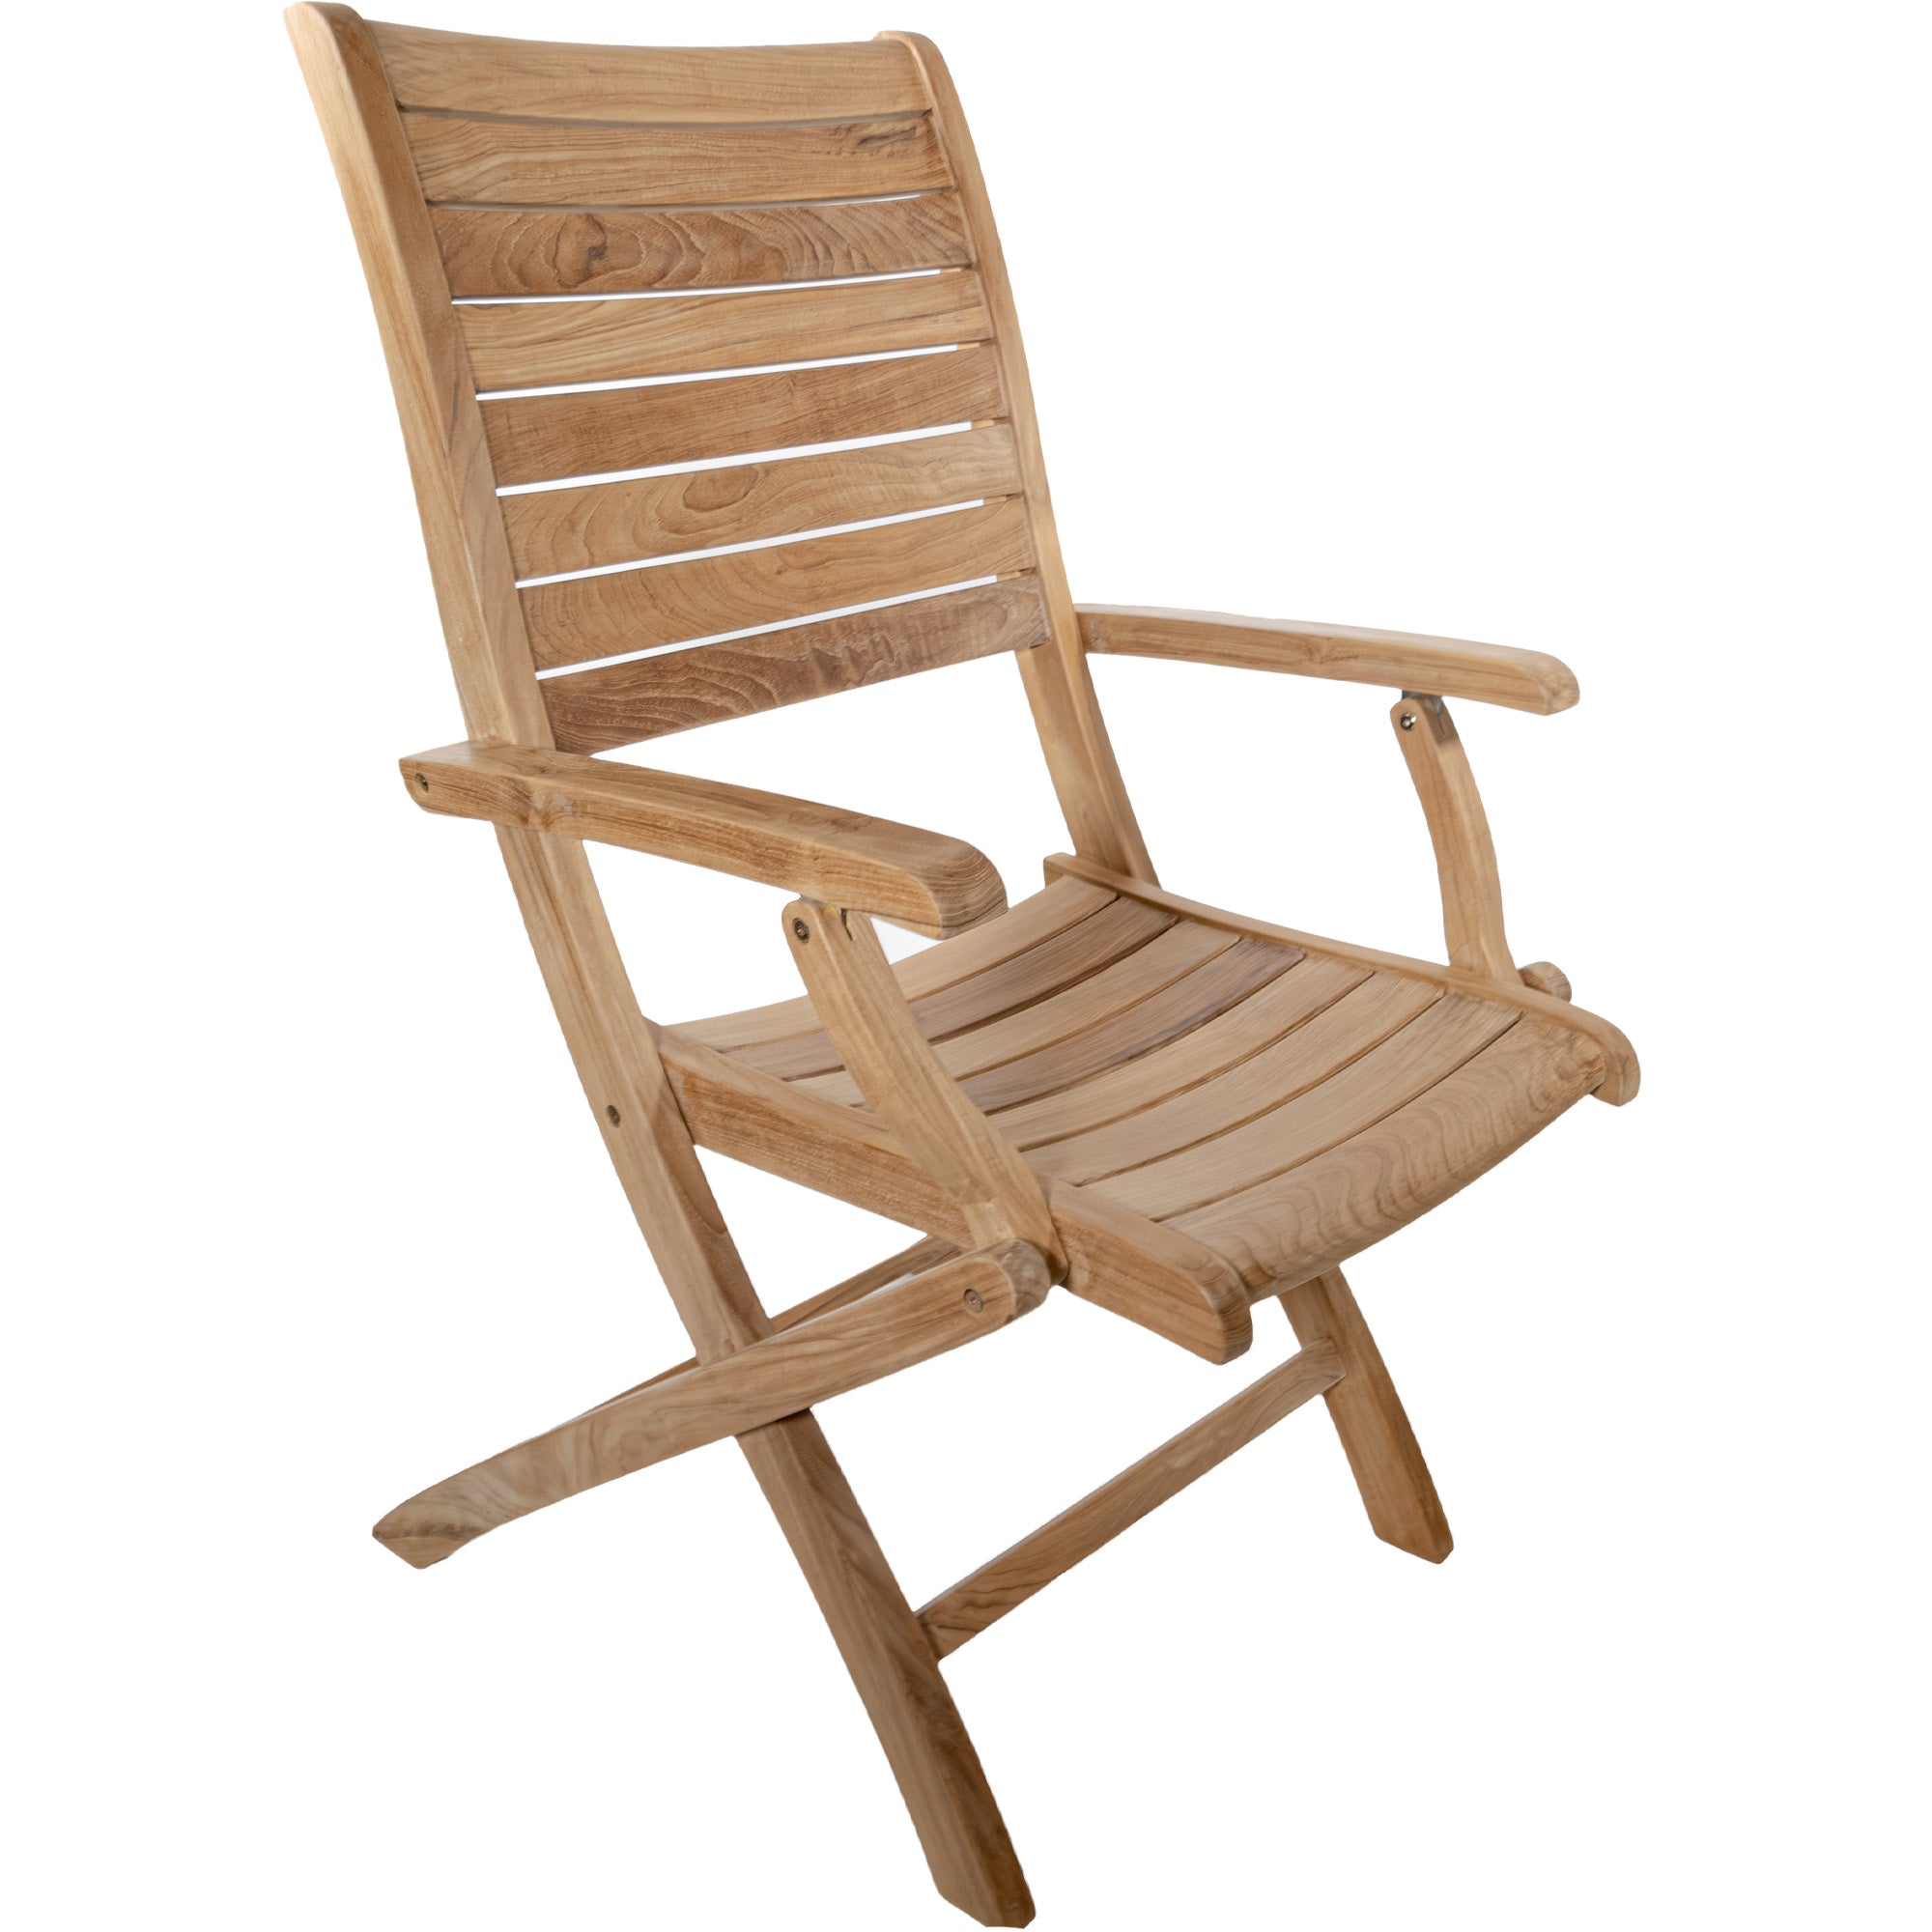 Naples Natural Teak Outdoor Patio Folding Chair with Arm Rests